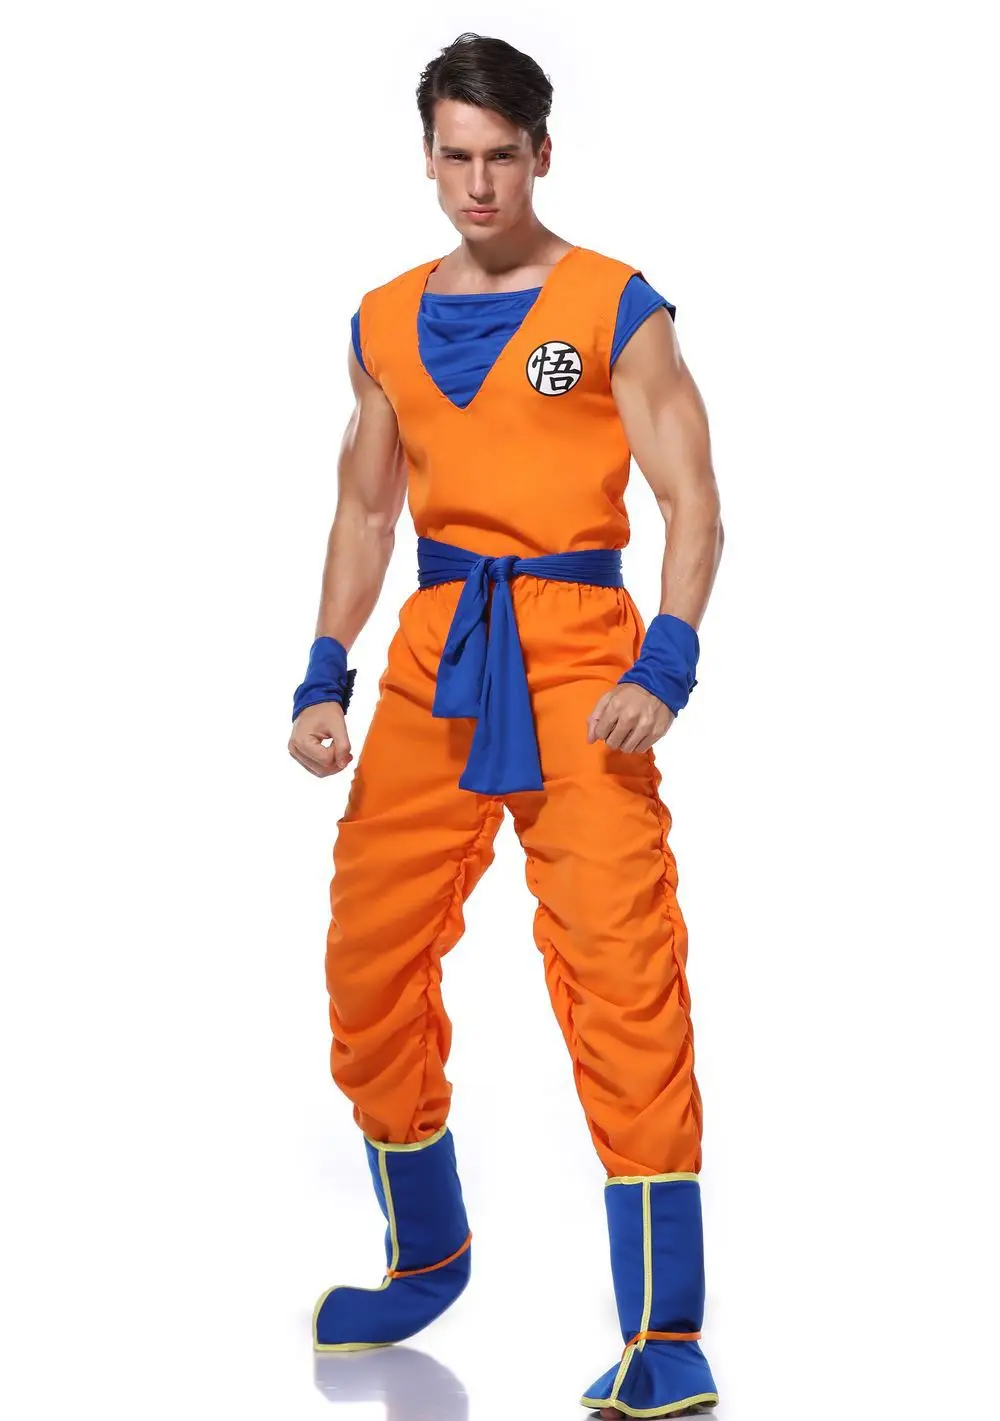 Baby Kids Boy Christmas Fancy Party Dragon Ball Costume Outfit Jacket Clothes